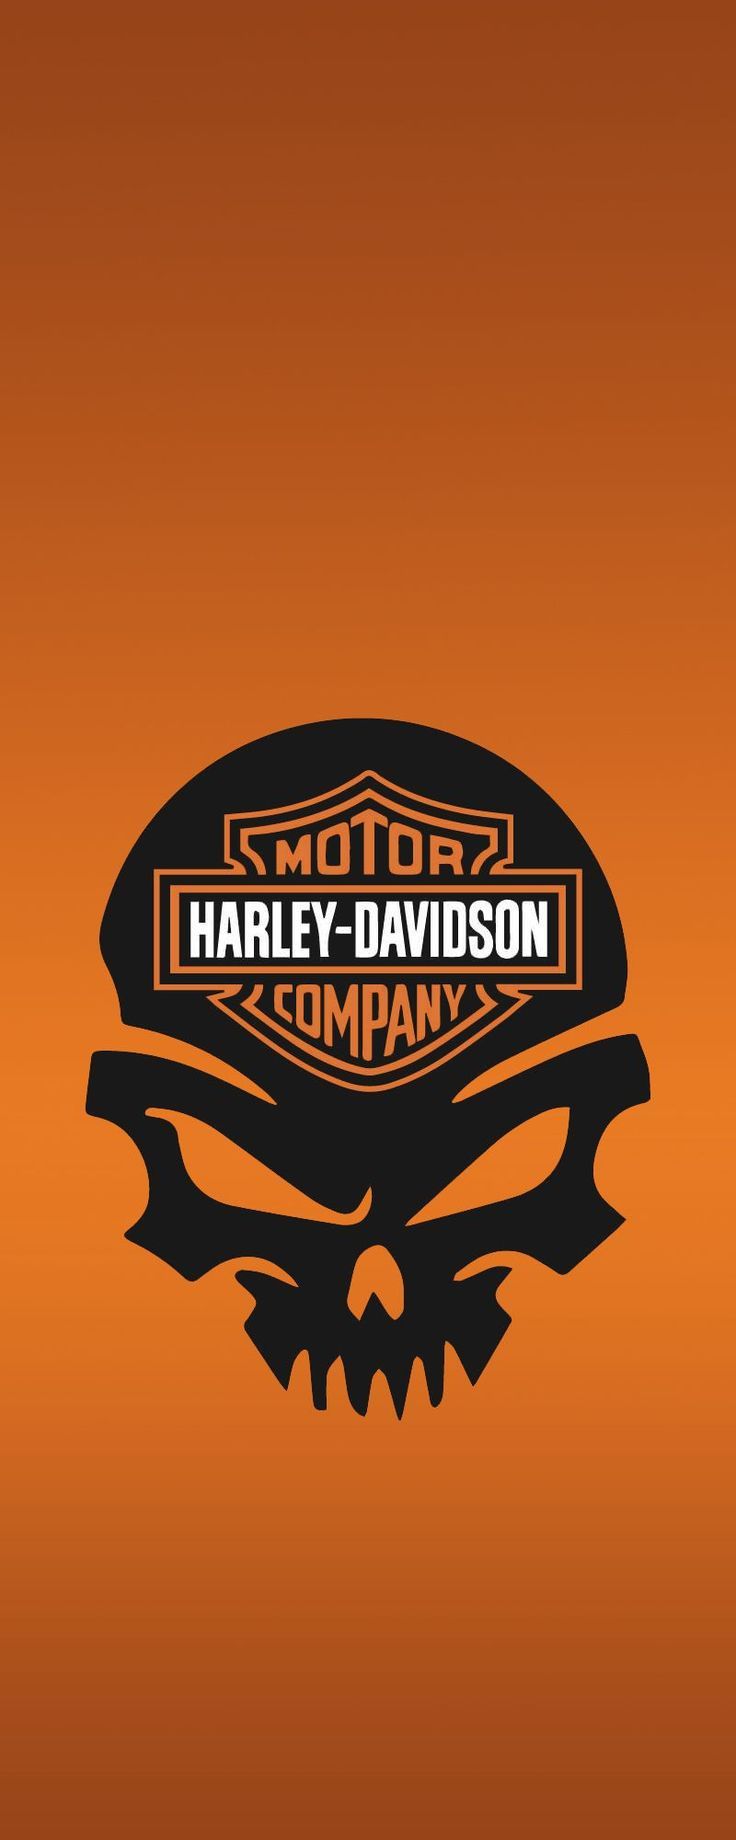 Harley Softail iPhone Wallpapers  Harley davidson wallpaper Harley  davidson artwork Harley d